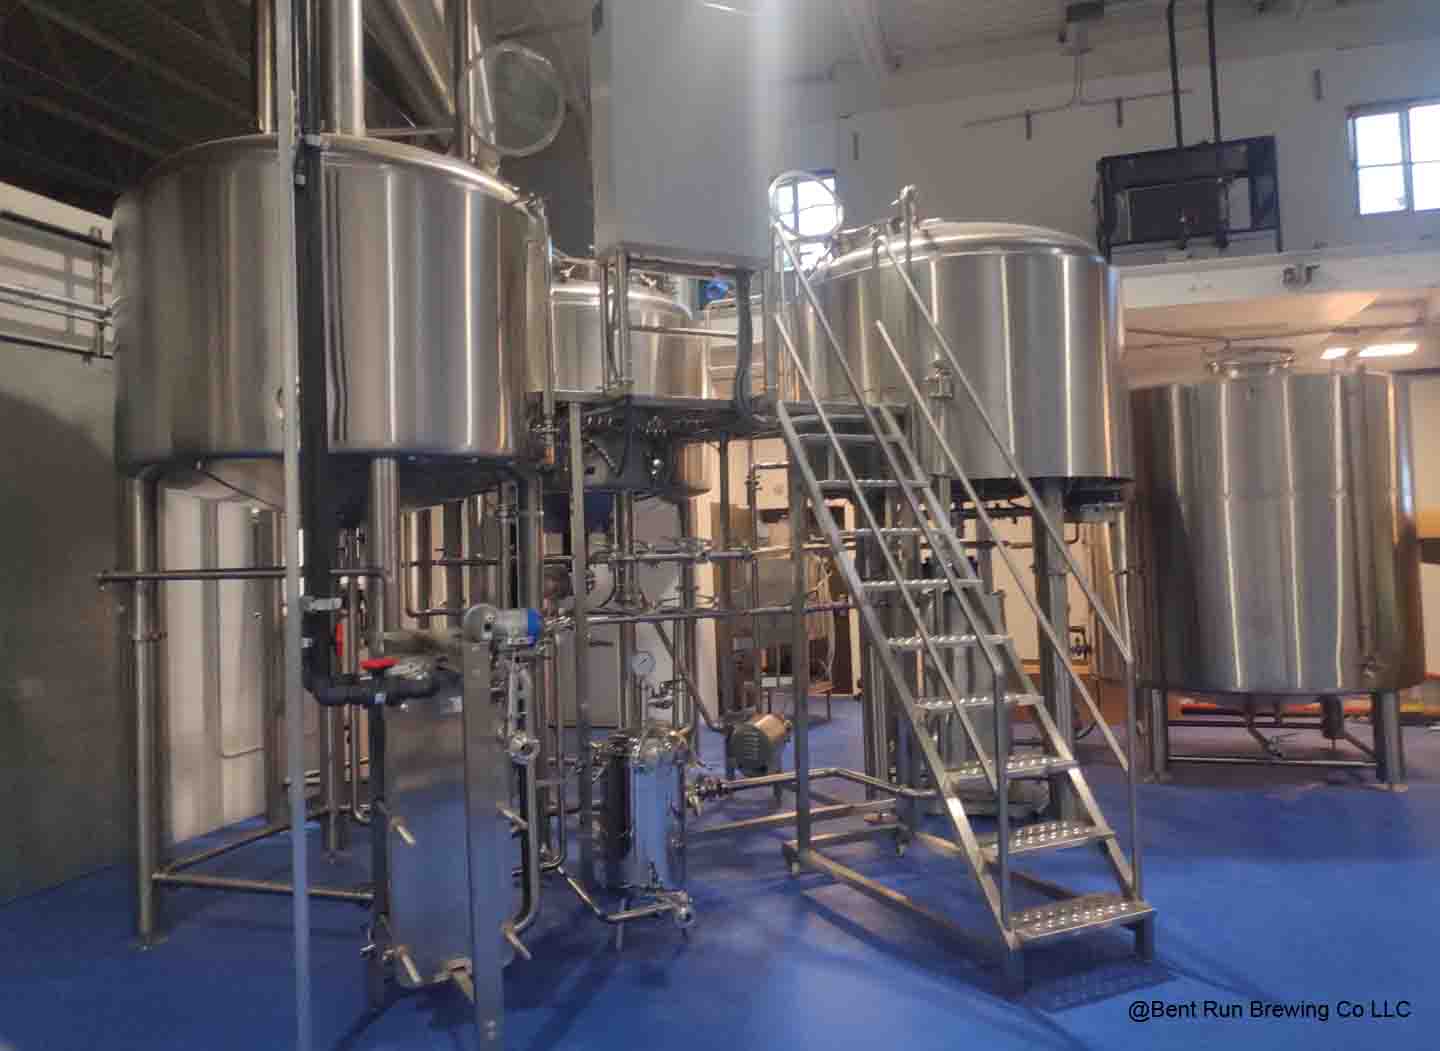 What changes should be with brewery equipment when boil